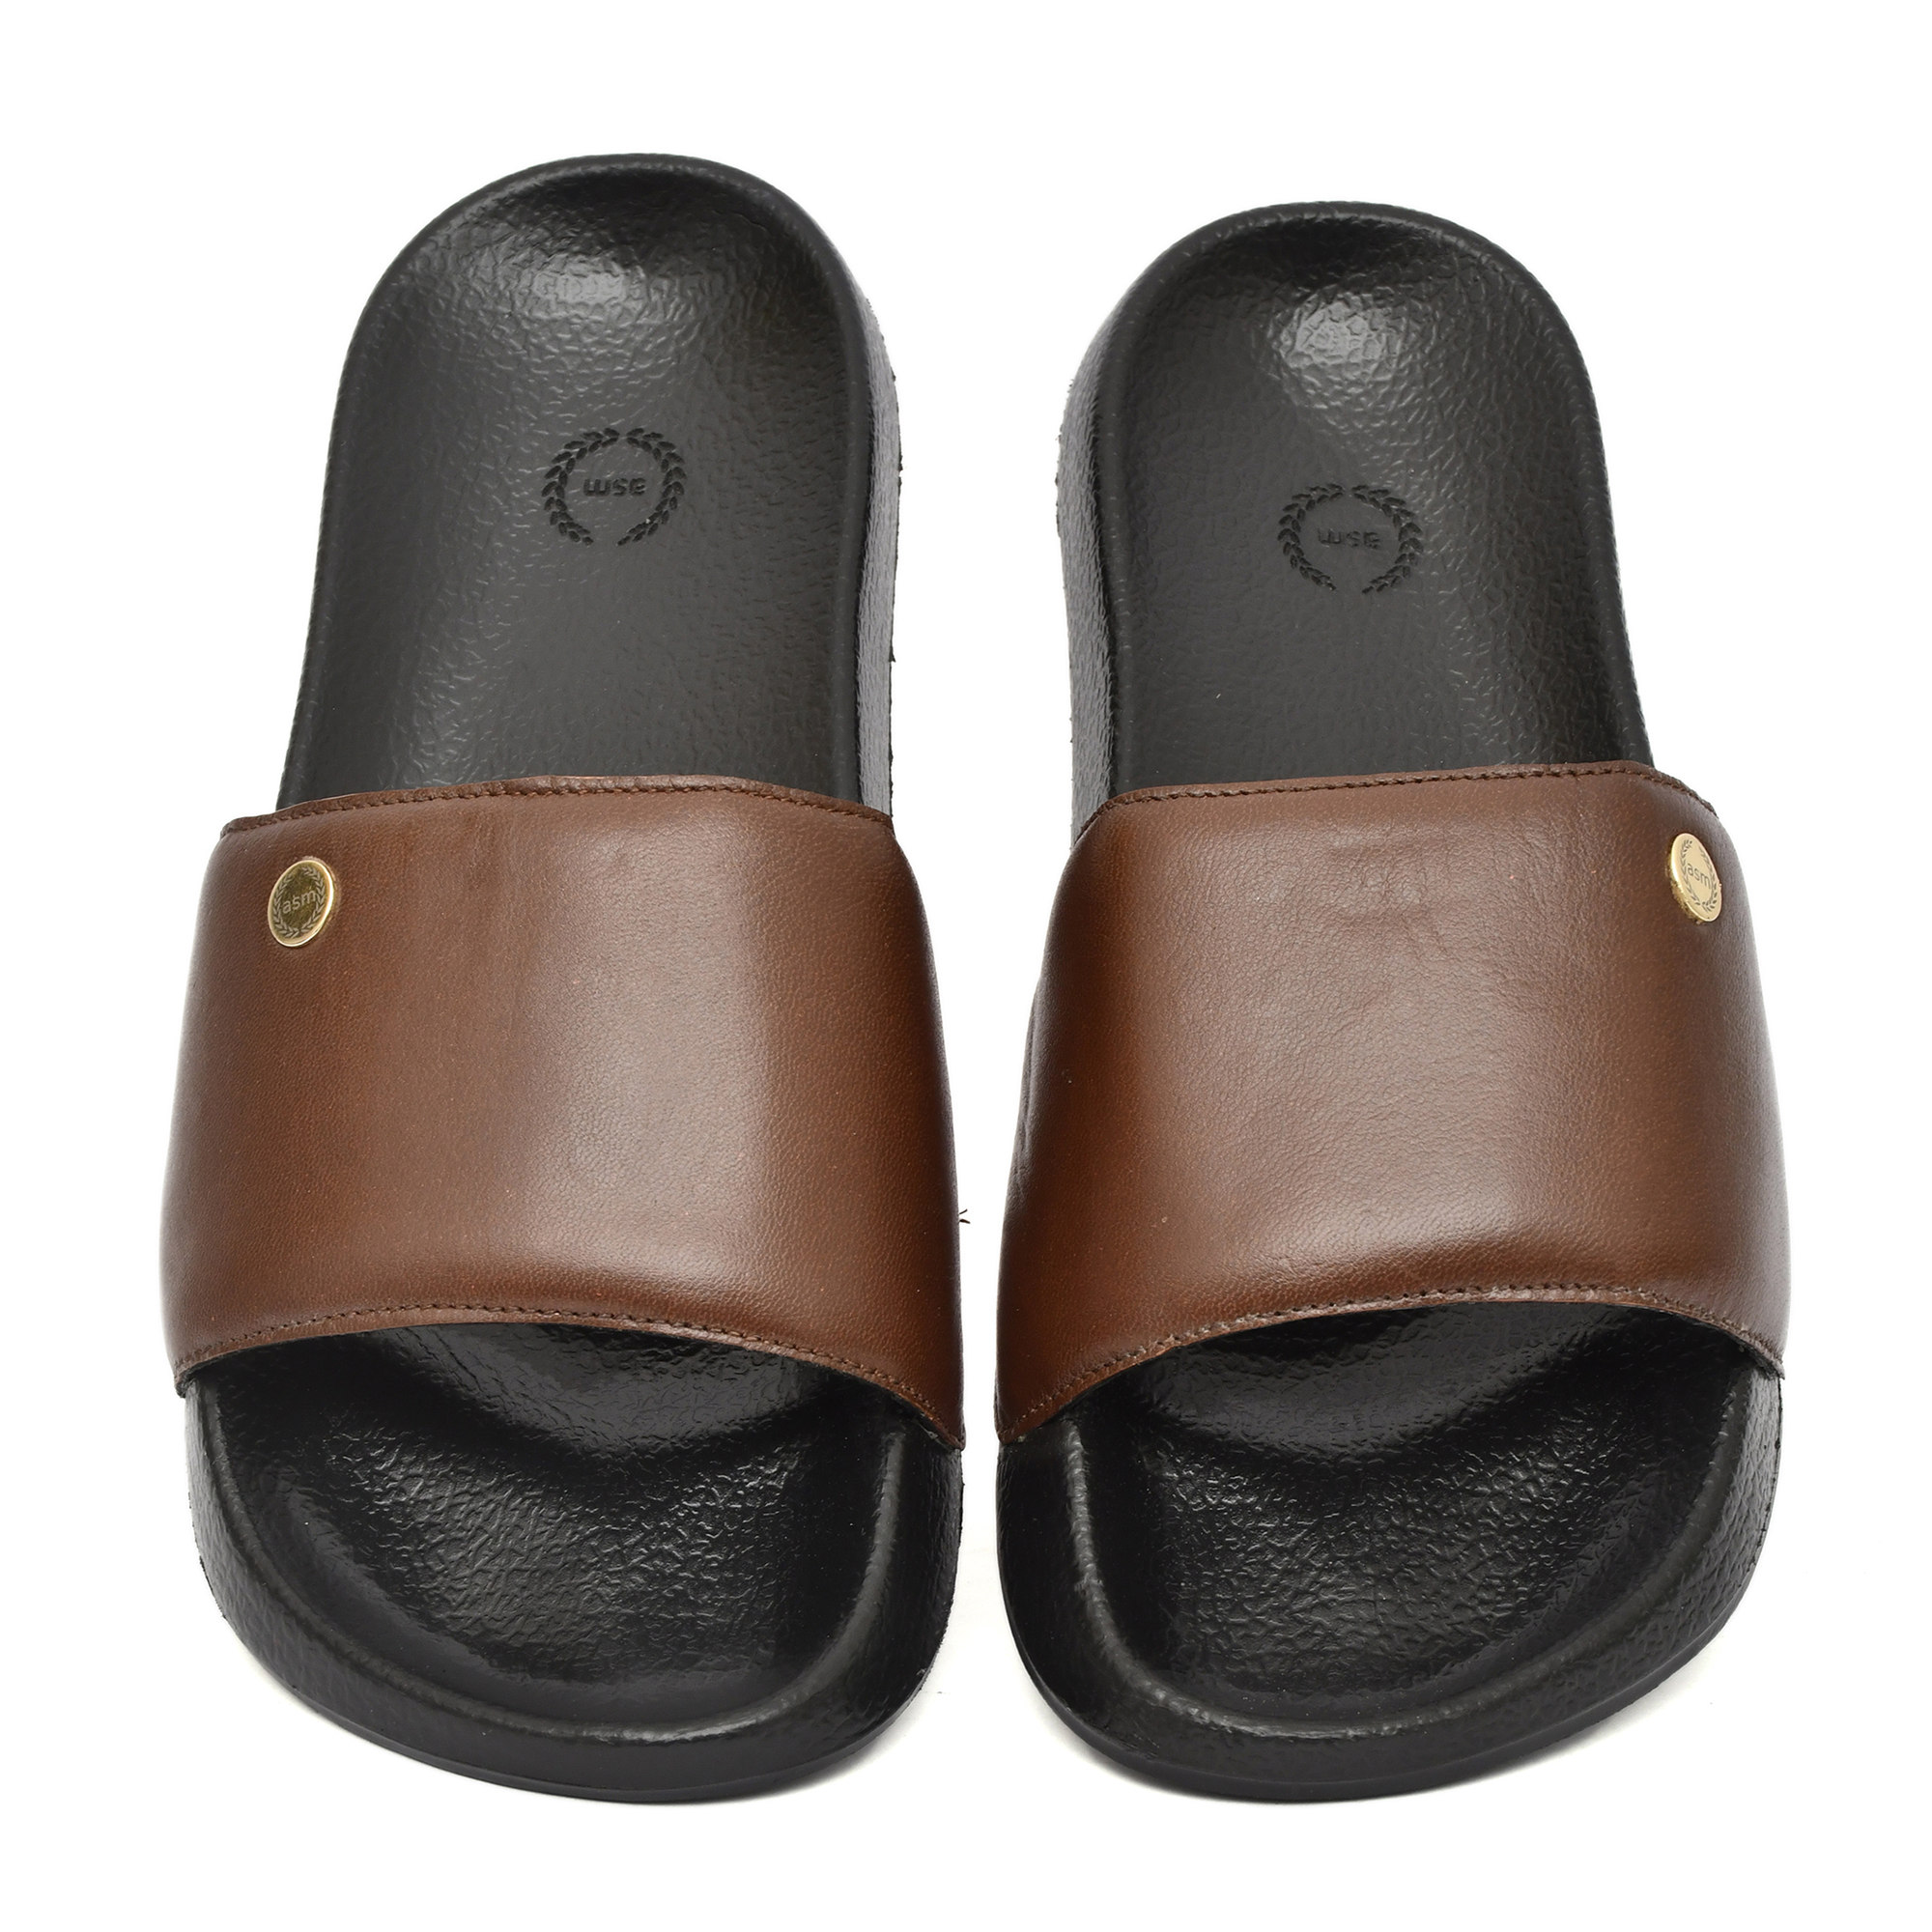 Brown Leather Slippers for Men by asm.